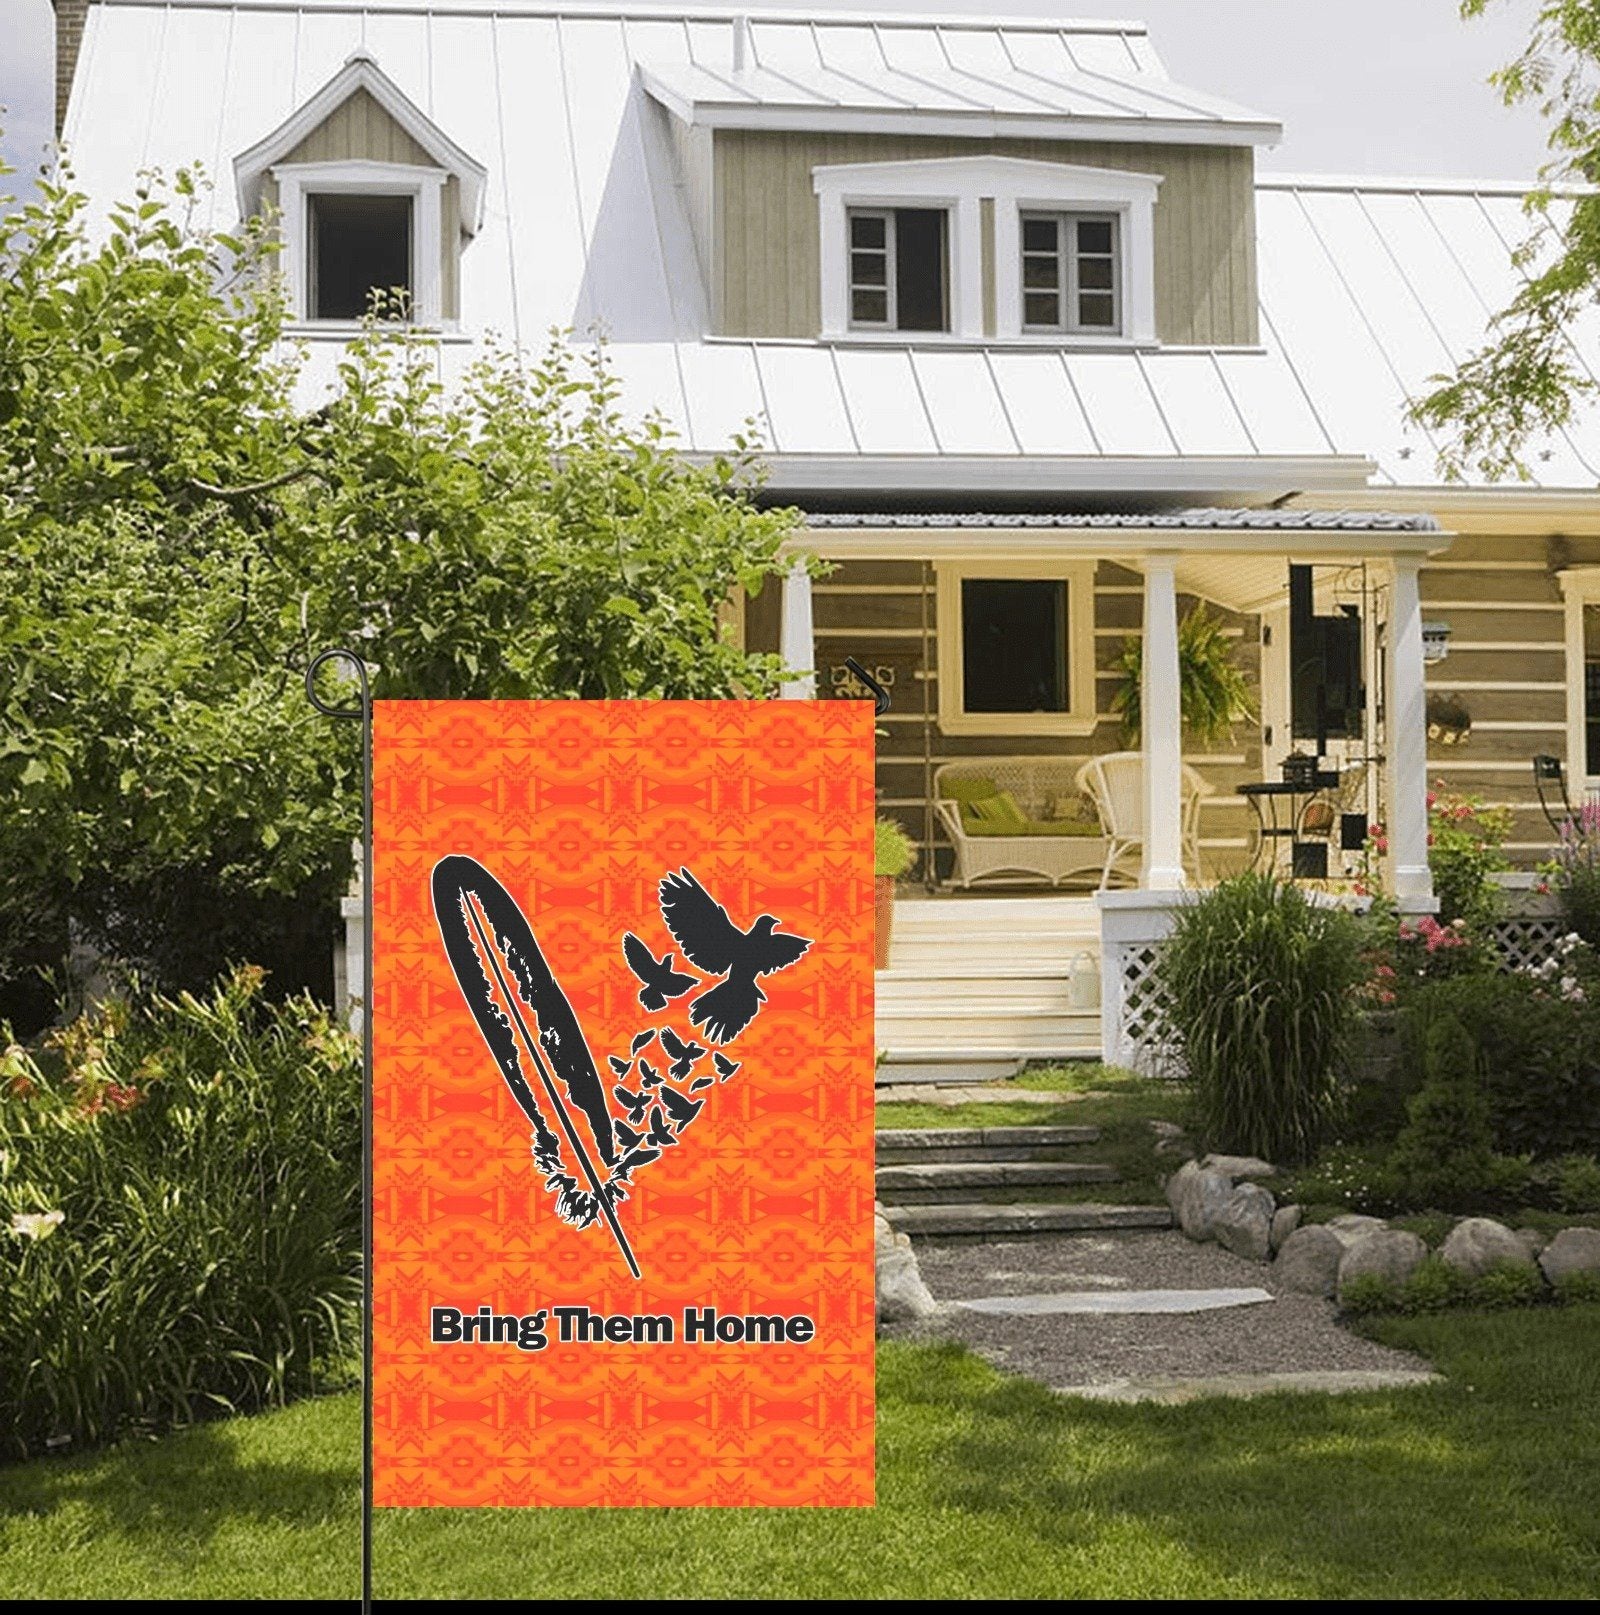 Fancy Orange - Bring Them Home Feather with Doves Garden Flag 36''x60'' (Two Sides Printing) Garden Flag 36‘’x60‘’ (Two Sides) e-joyer 